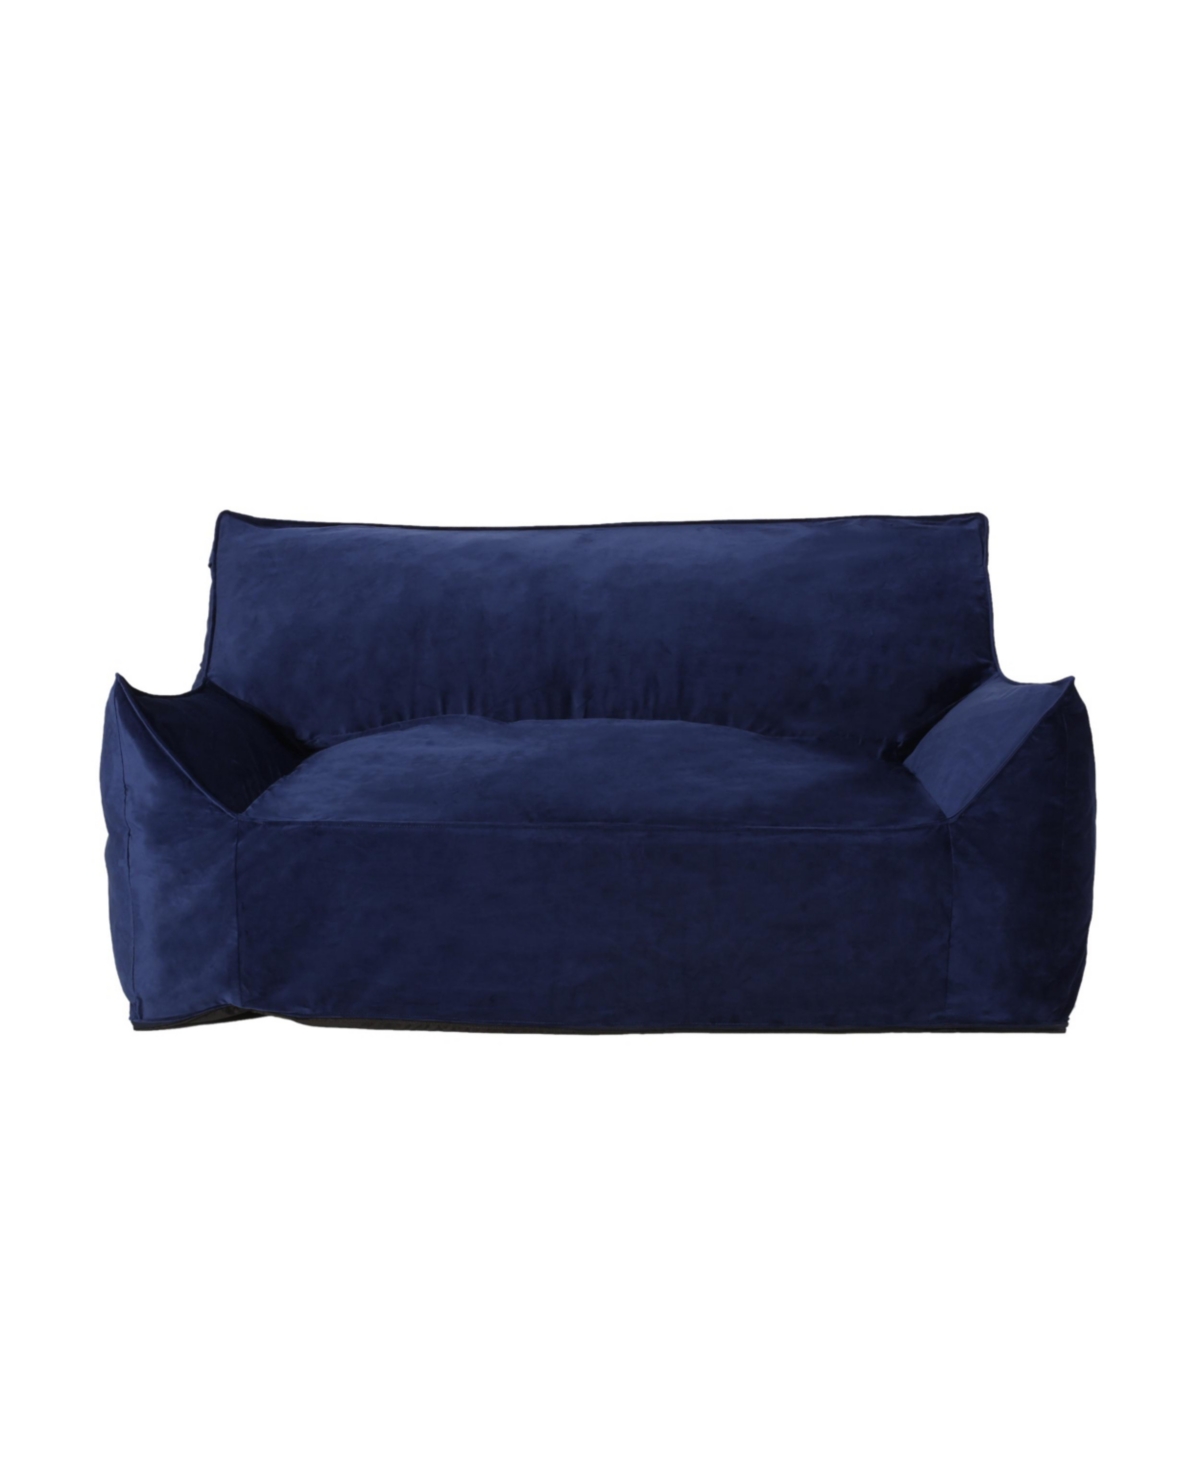 Noble House Velie Modern 2 Seater Bean Bag Chair With Armrests In Navy Blue